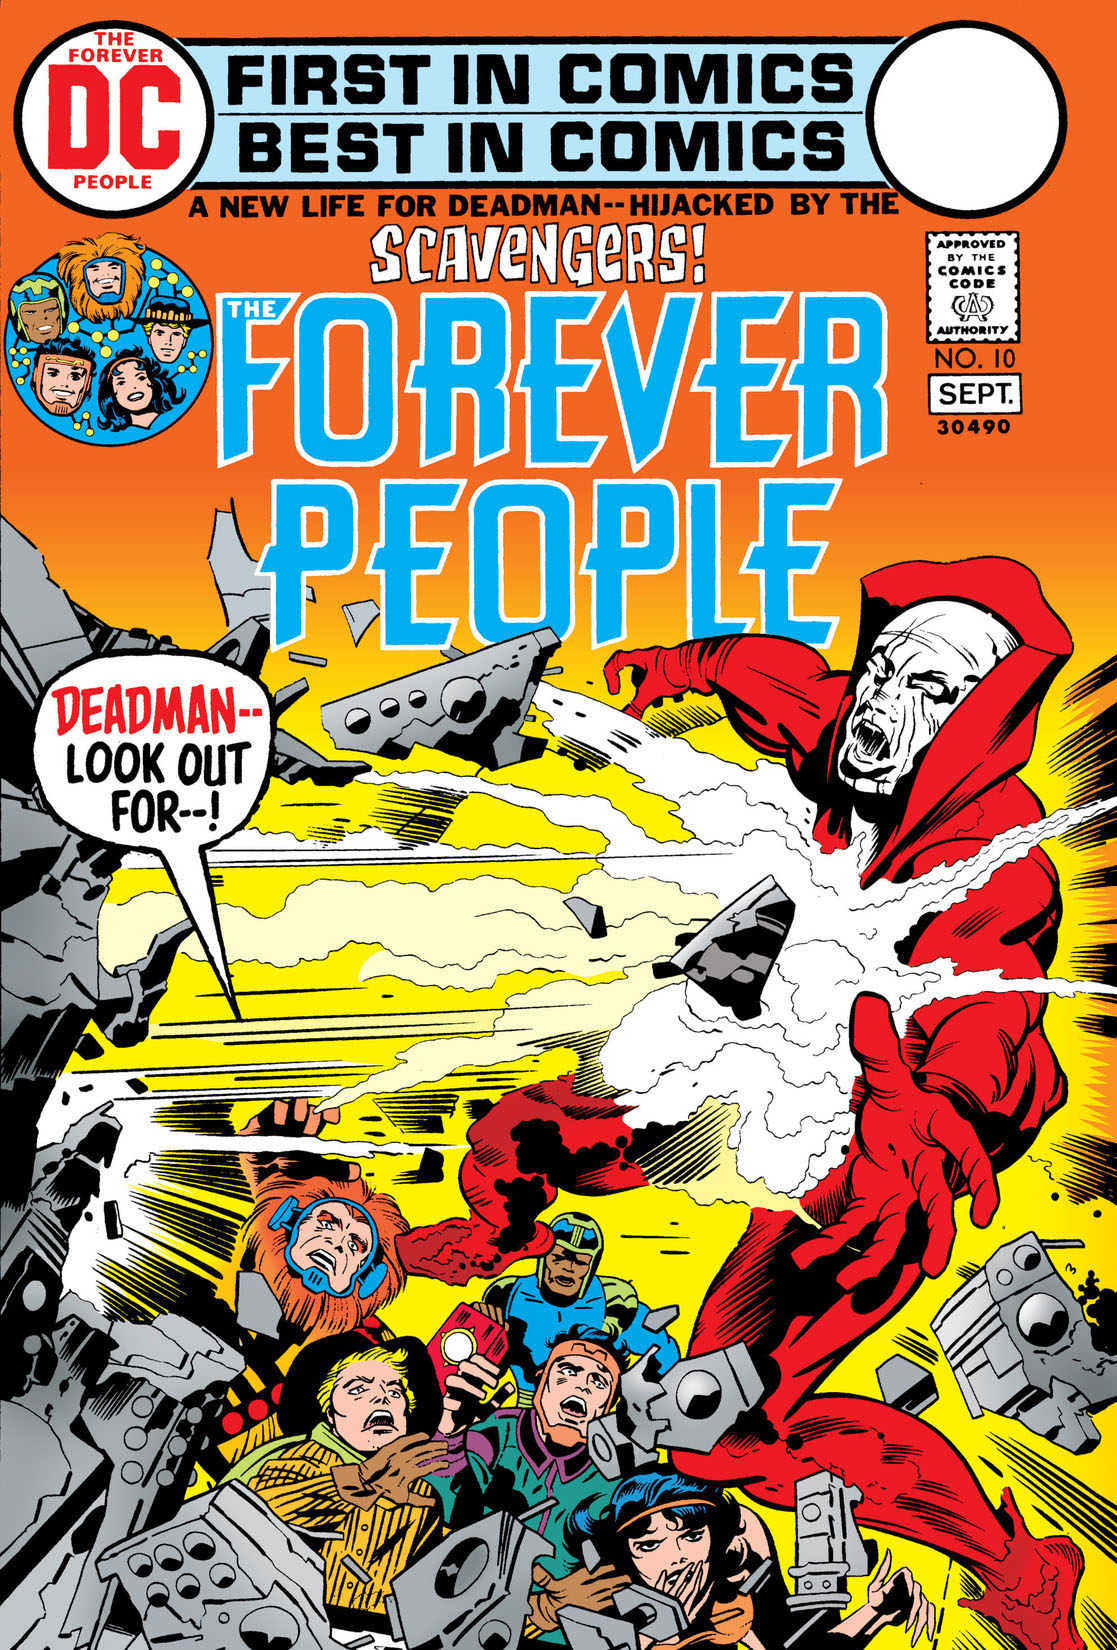 The Forever People #10 preview images